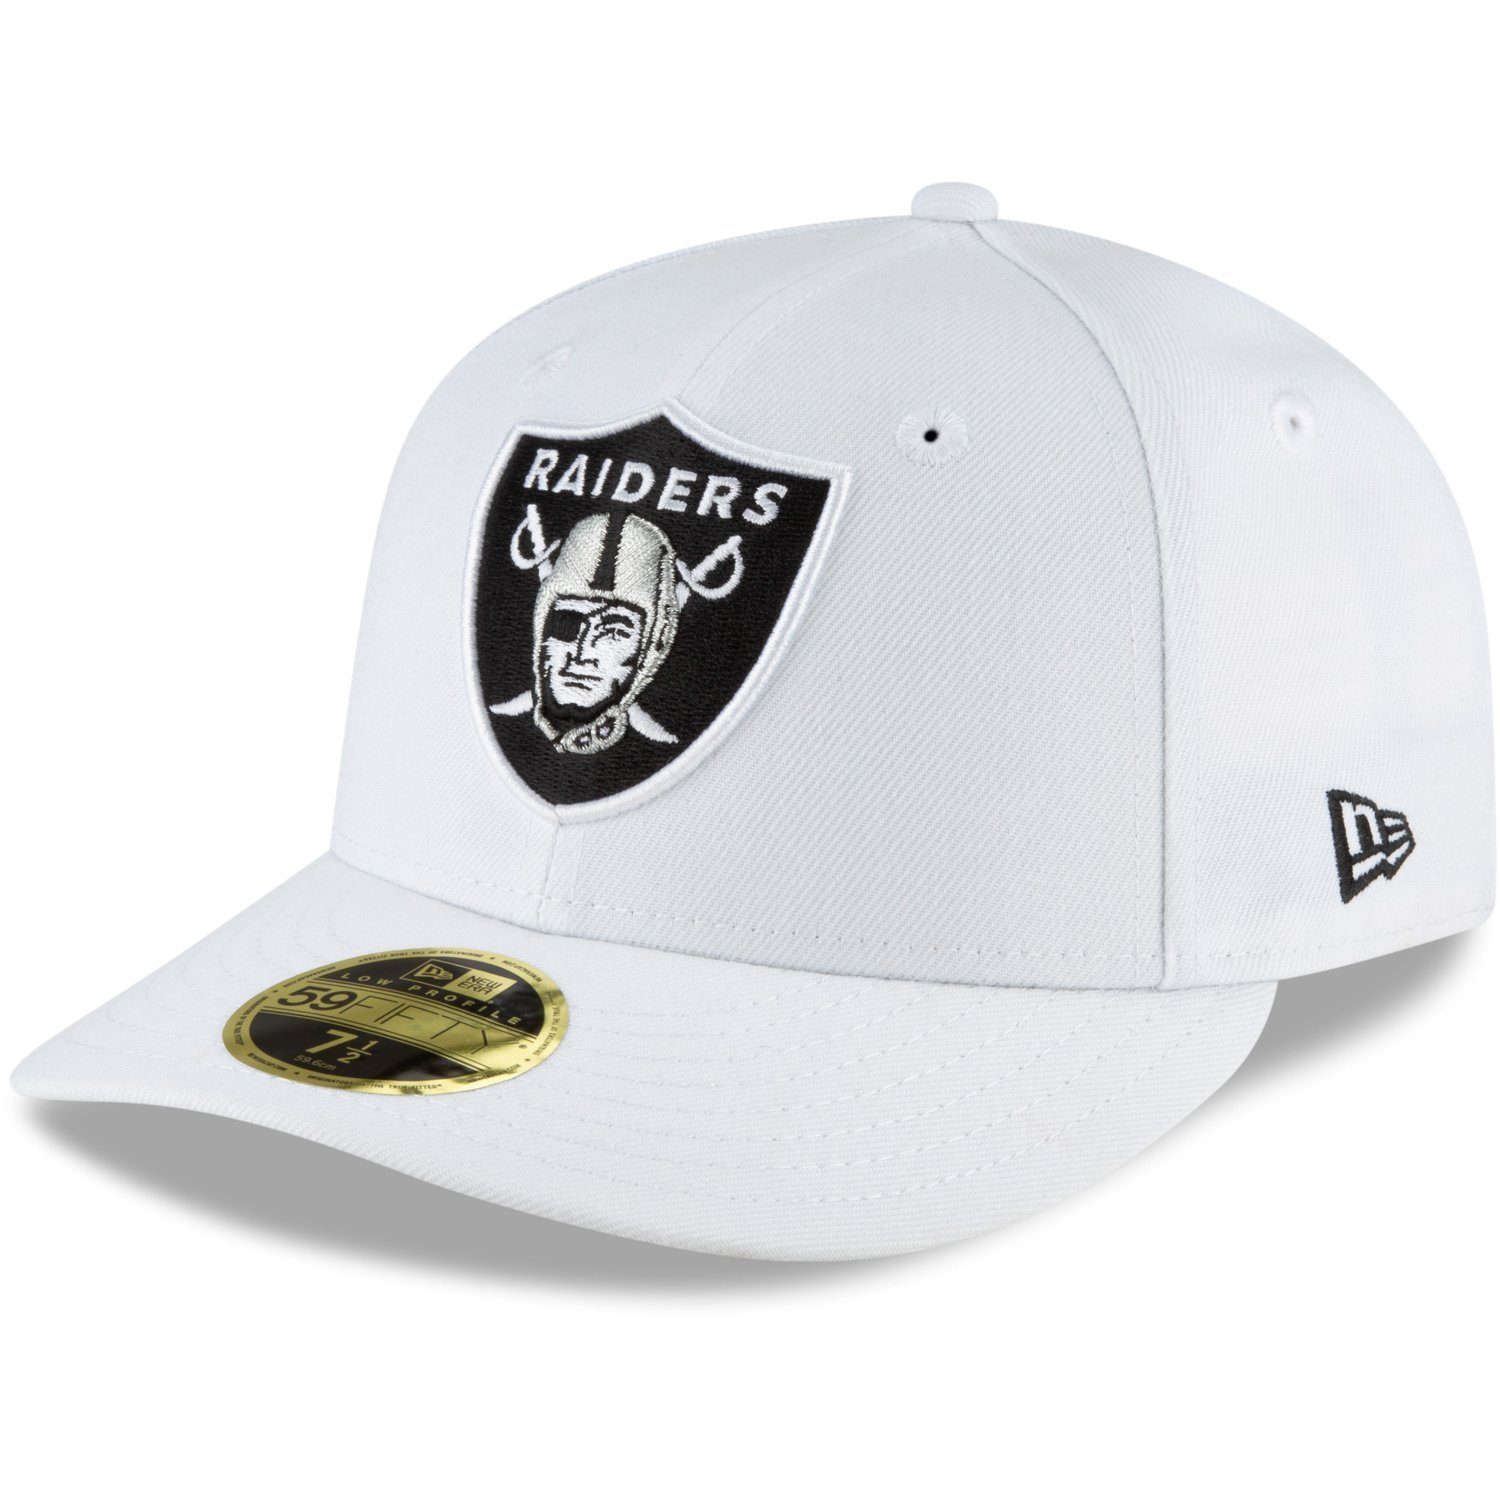 New Era Fitted Cap Weiß Vegas Low Profile Raiders 59Fifty Las